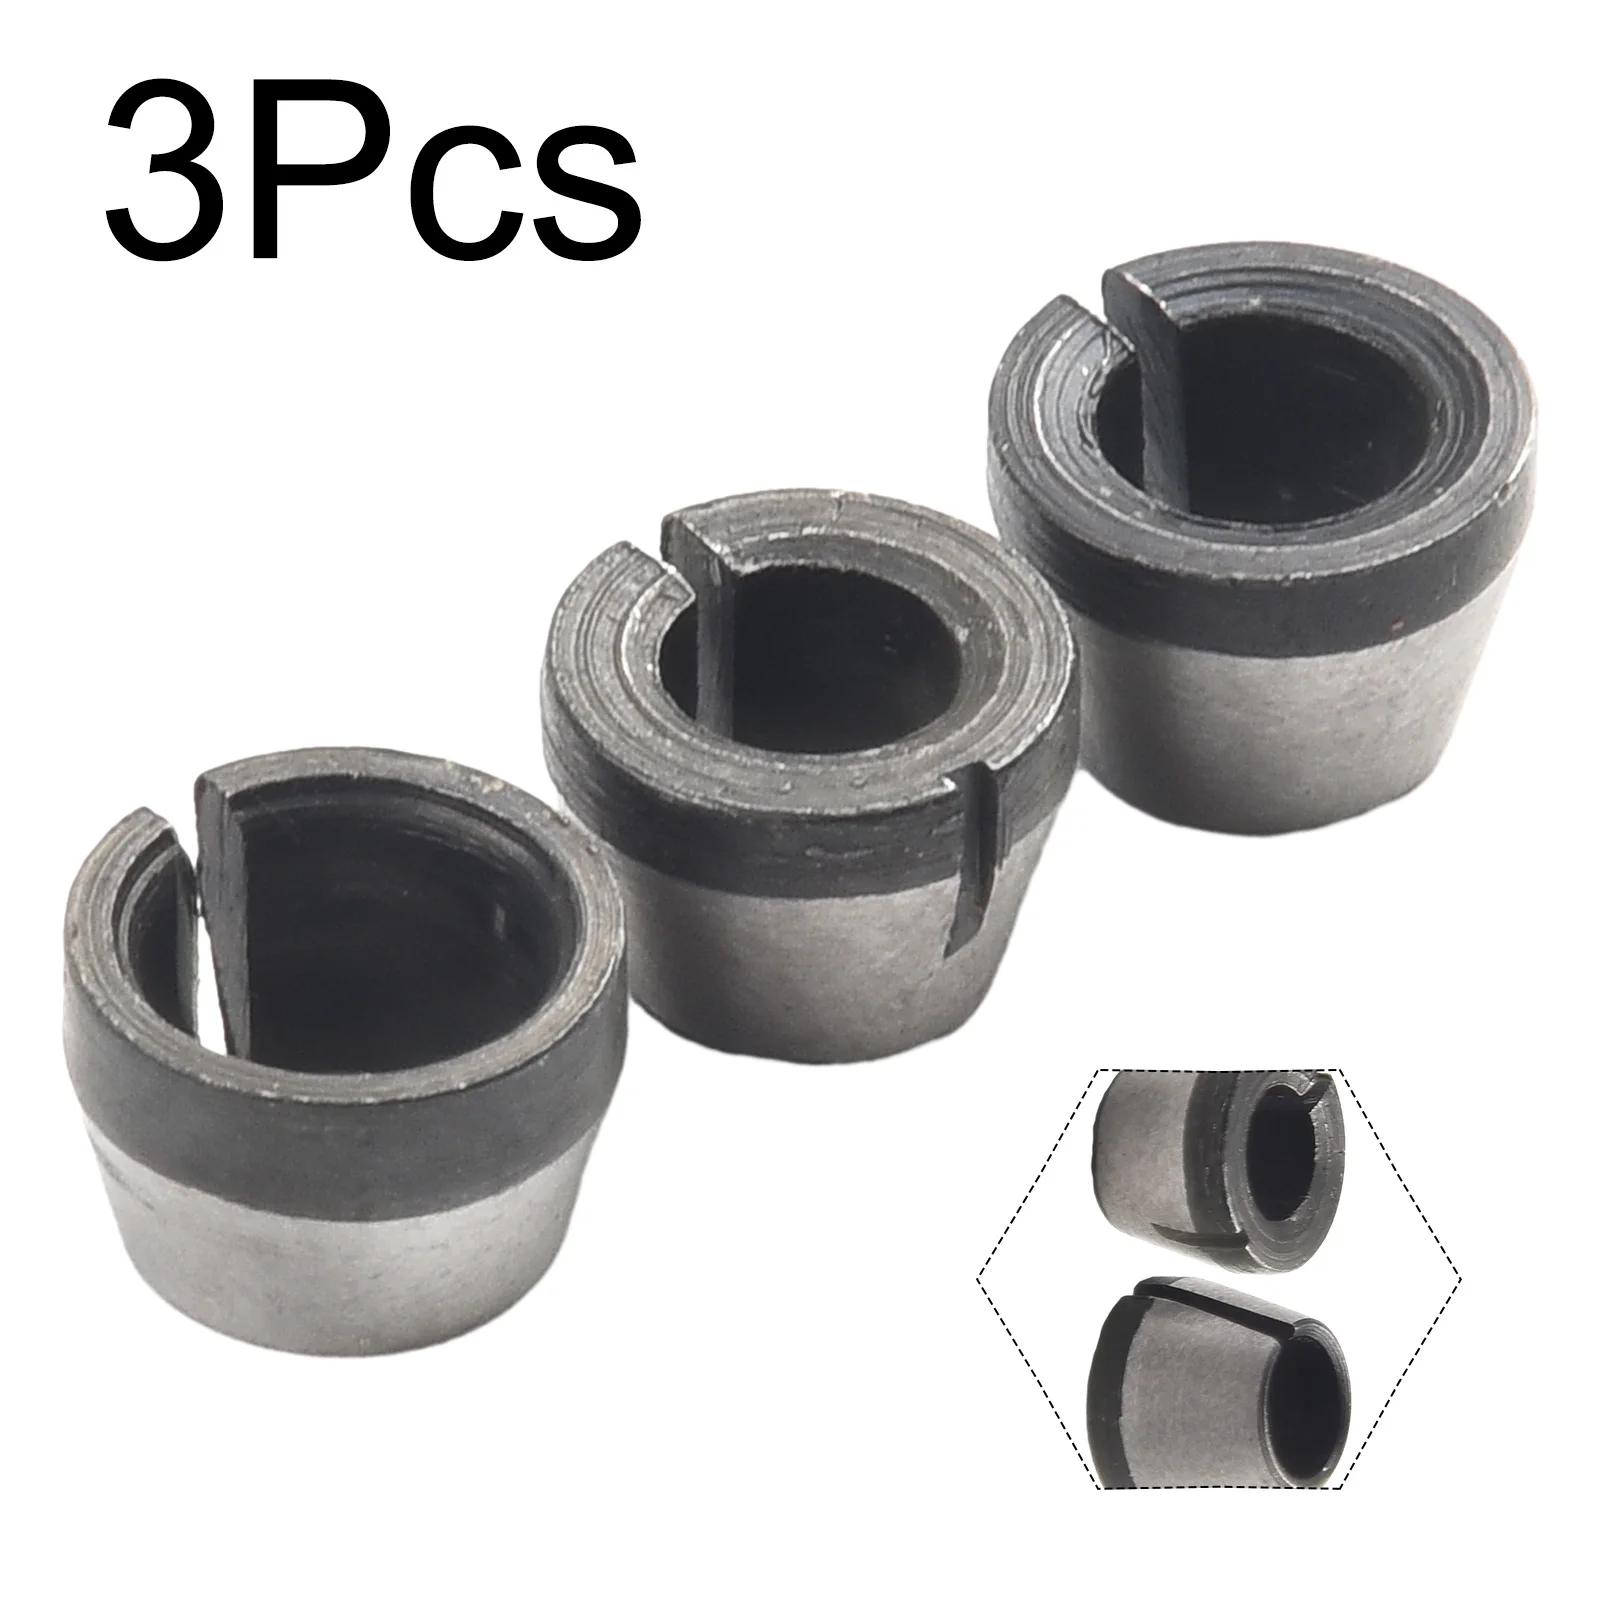 3PCS Collet Chuck High Precision Adapter Engraving Trimming Machine Electric Router Milling Cutter Accessories